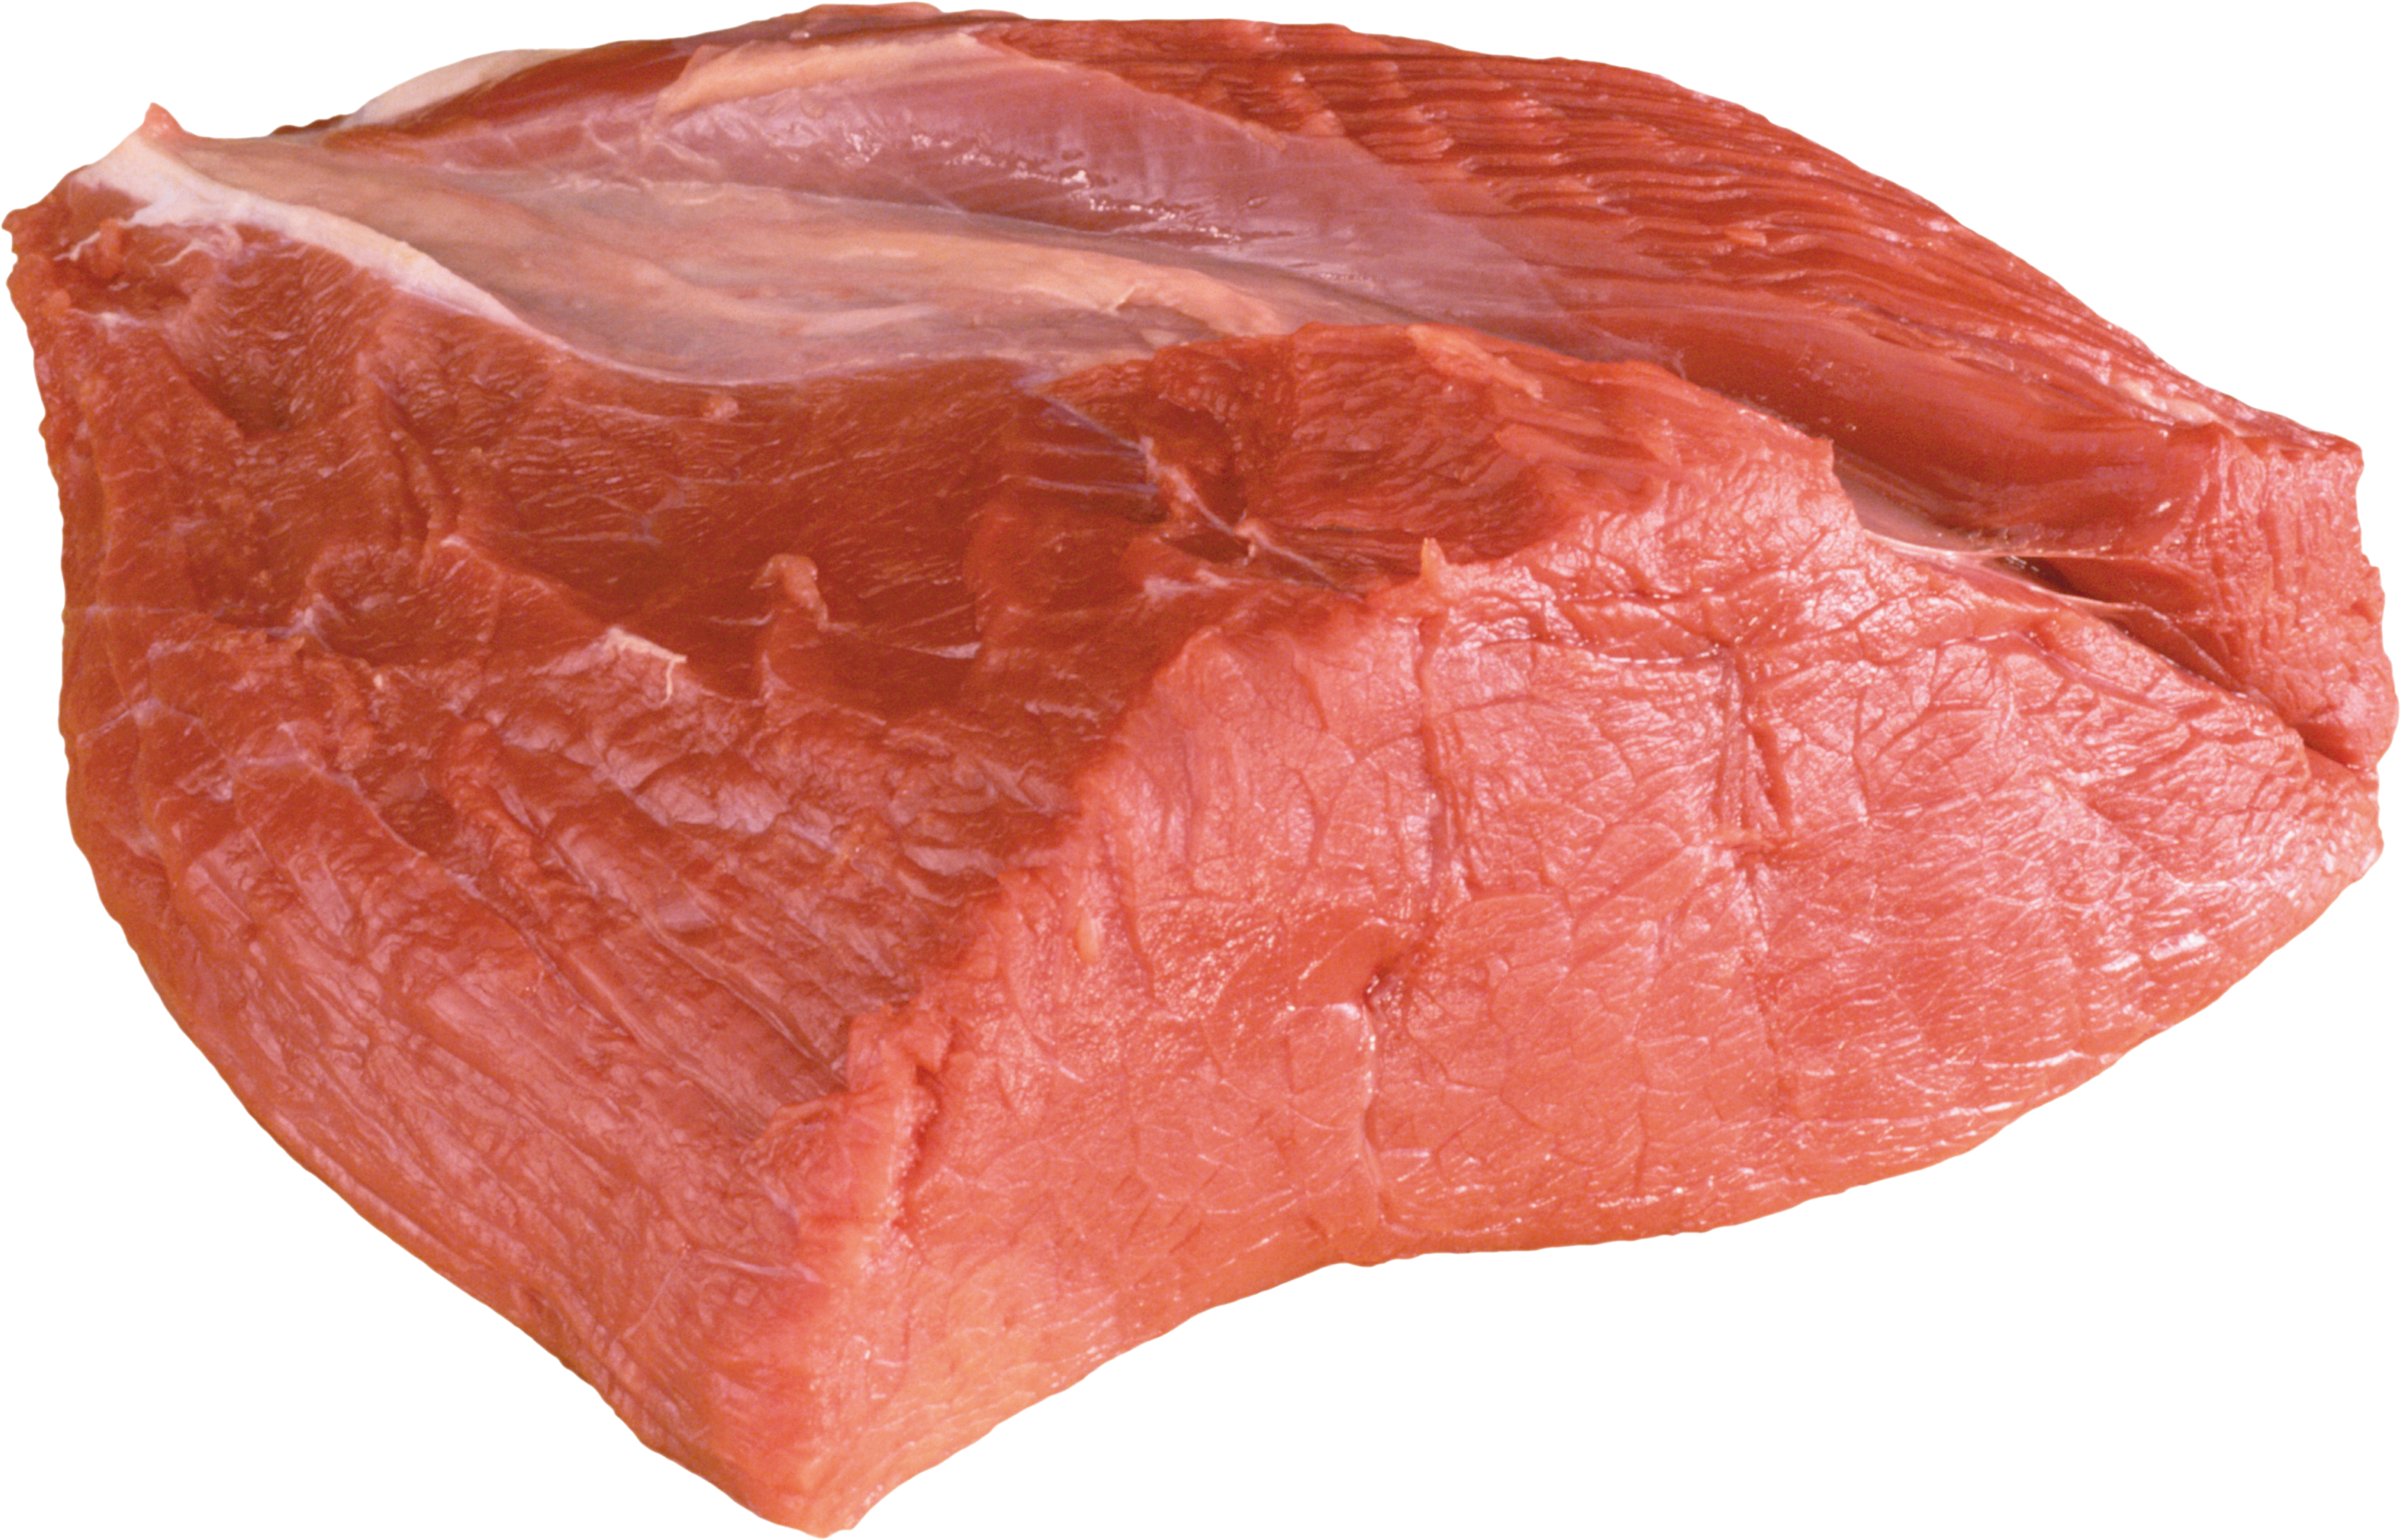 Png image free download. Beef clipart meat product